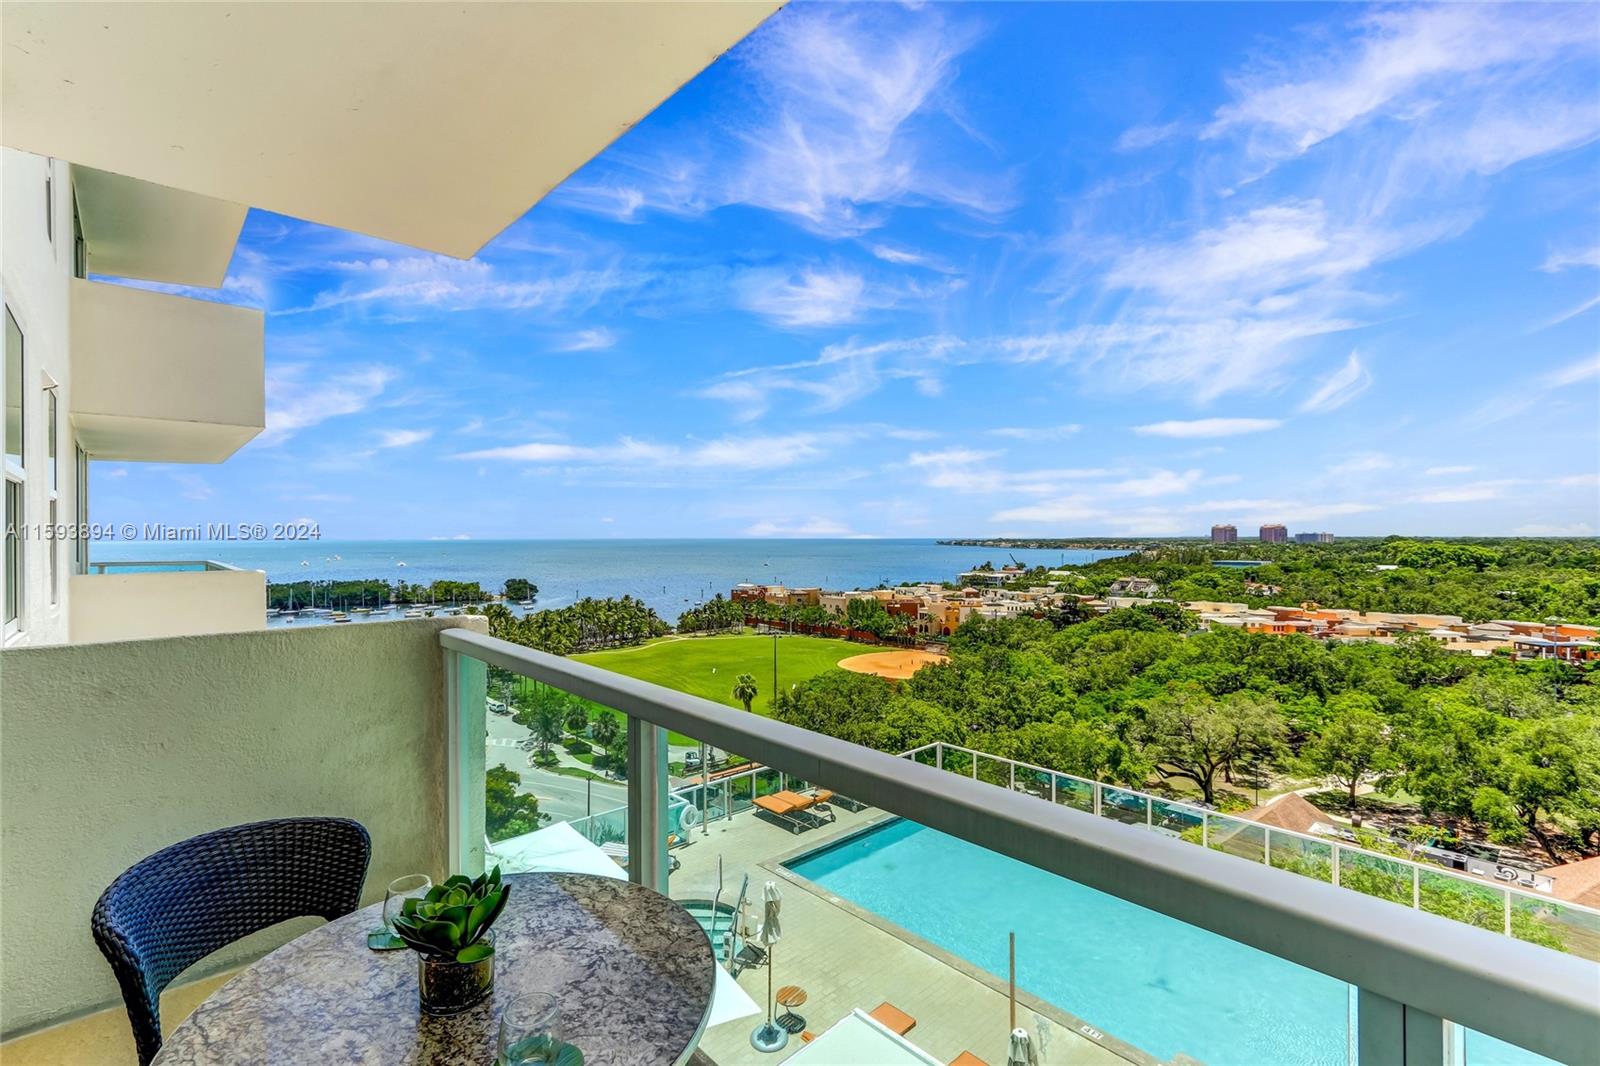 Stunning residence with bay, pool & city views in Arya, a full-service luxury condo/hotel in the heart of Coconut Grove’s historic village. Walk to trendy galleries, boutiques, cafes and bayfront parks & marinas. Updated, light-filled interior spaces & a split-floorplan layout w/option to rent as 2 separate 1BR/1BA units or as a 1BR/2BA+ kitchen & living area. No rental restrictions. Offered fully furnished w/chic designer pieces for the ultimate in turn-key living. Exceptional building amenities include heated pool & restaurant overlooking the bay, fitness center w/sauna, squash courts, business center & 24 hr. attended lobby w/concierge. Secure garage parking (1 unassigned space) as well as valet & street parking for guests. Minutes to downtown, MIA, Brickell, Key Biscayne & the Beaches.